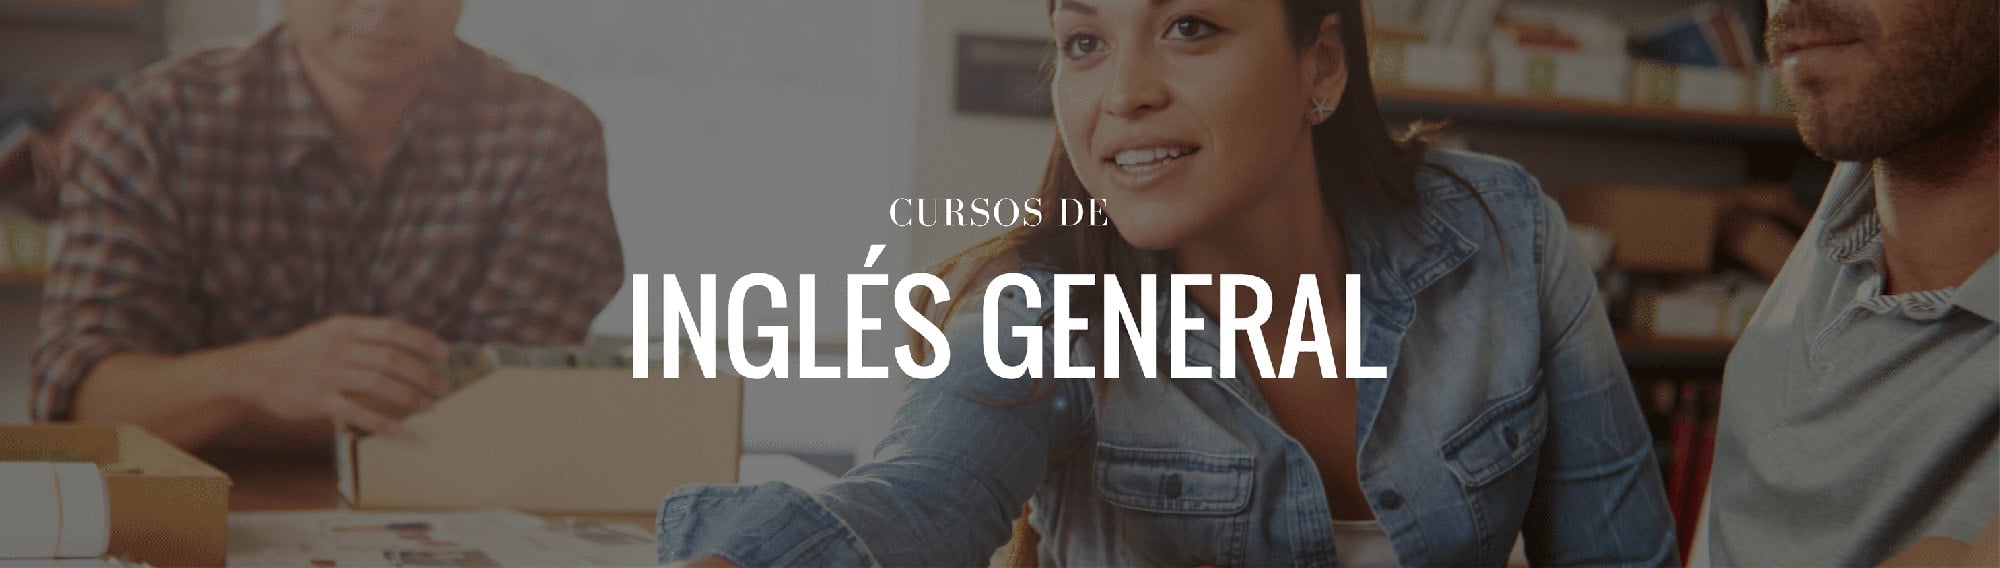 clases particulares de ingles ingles general